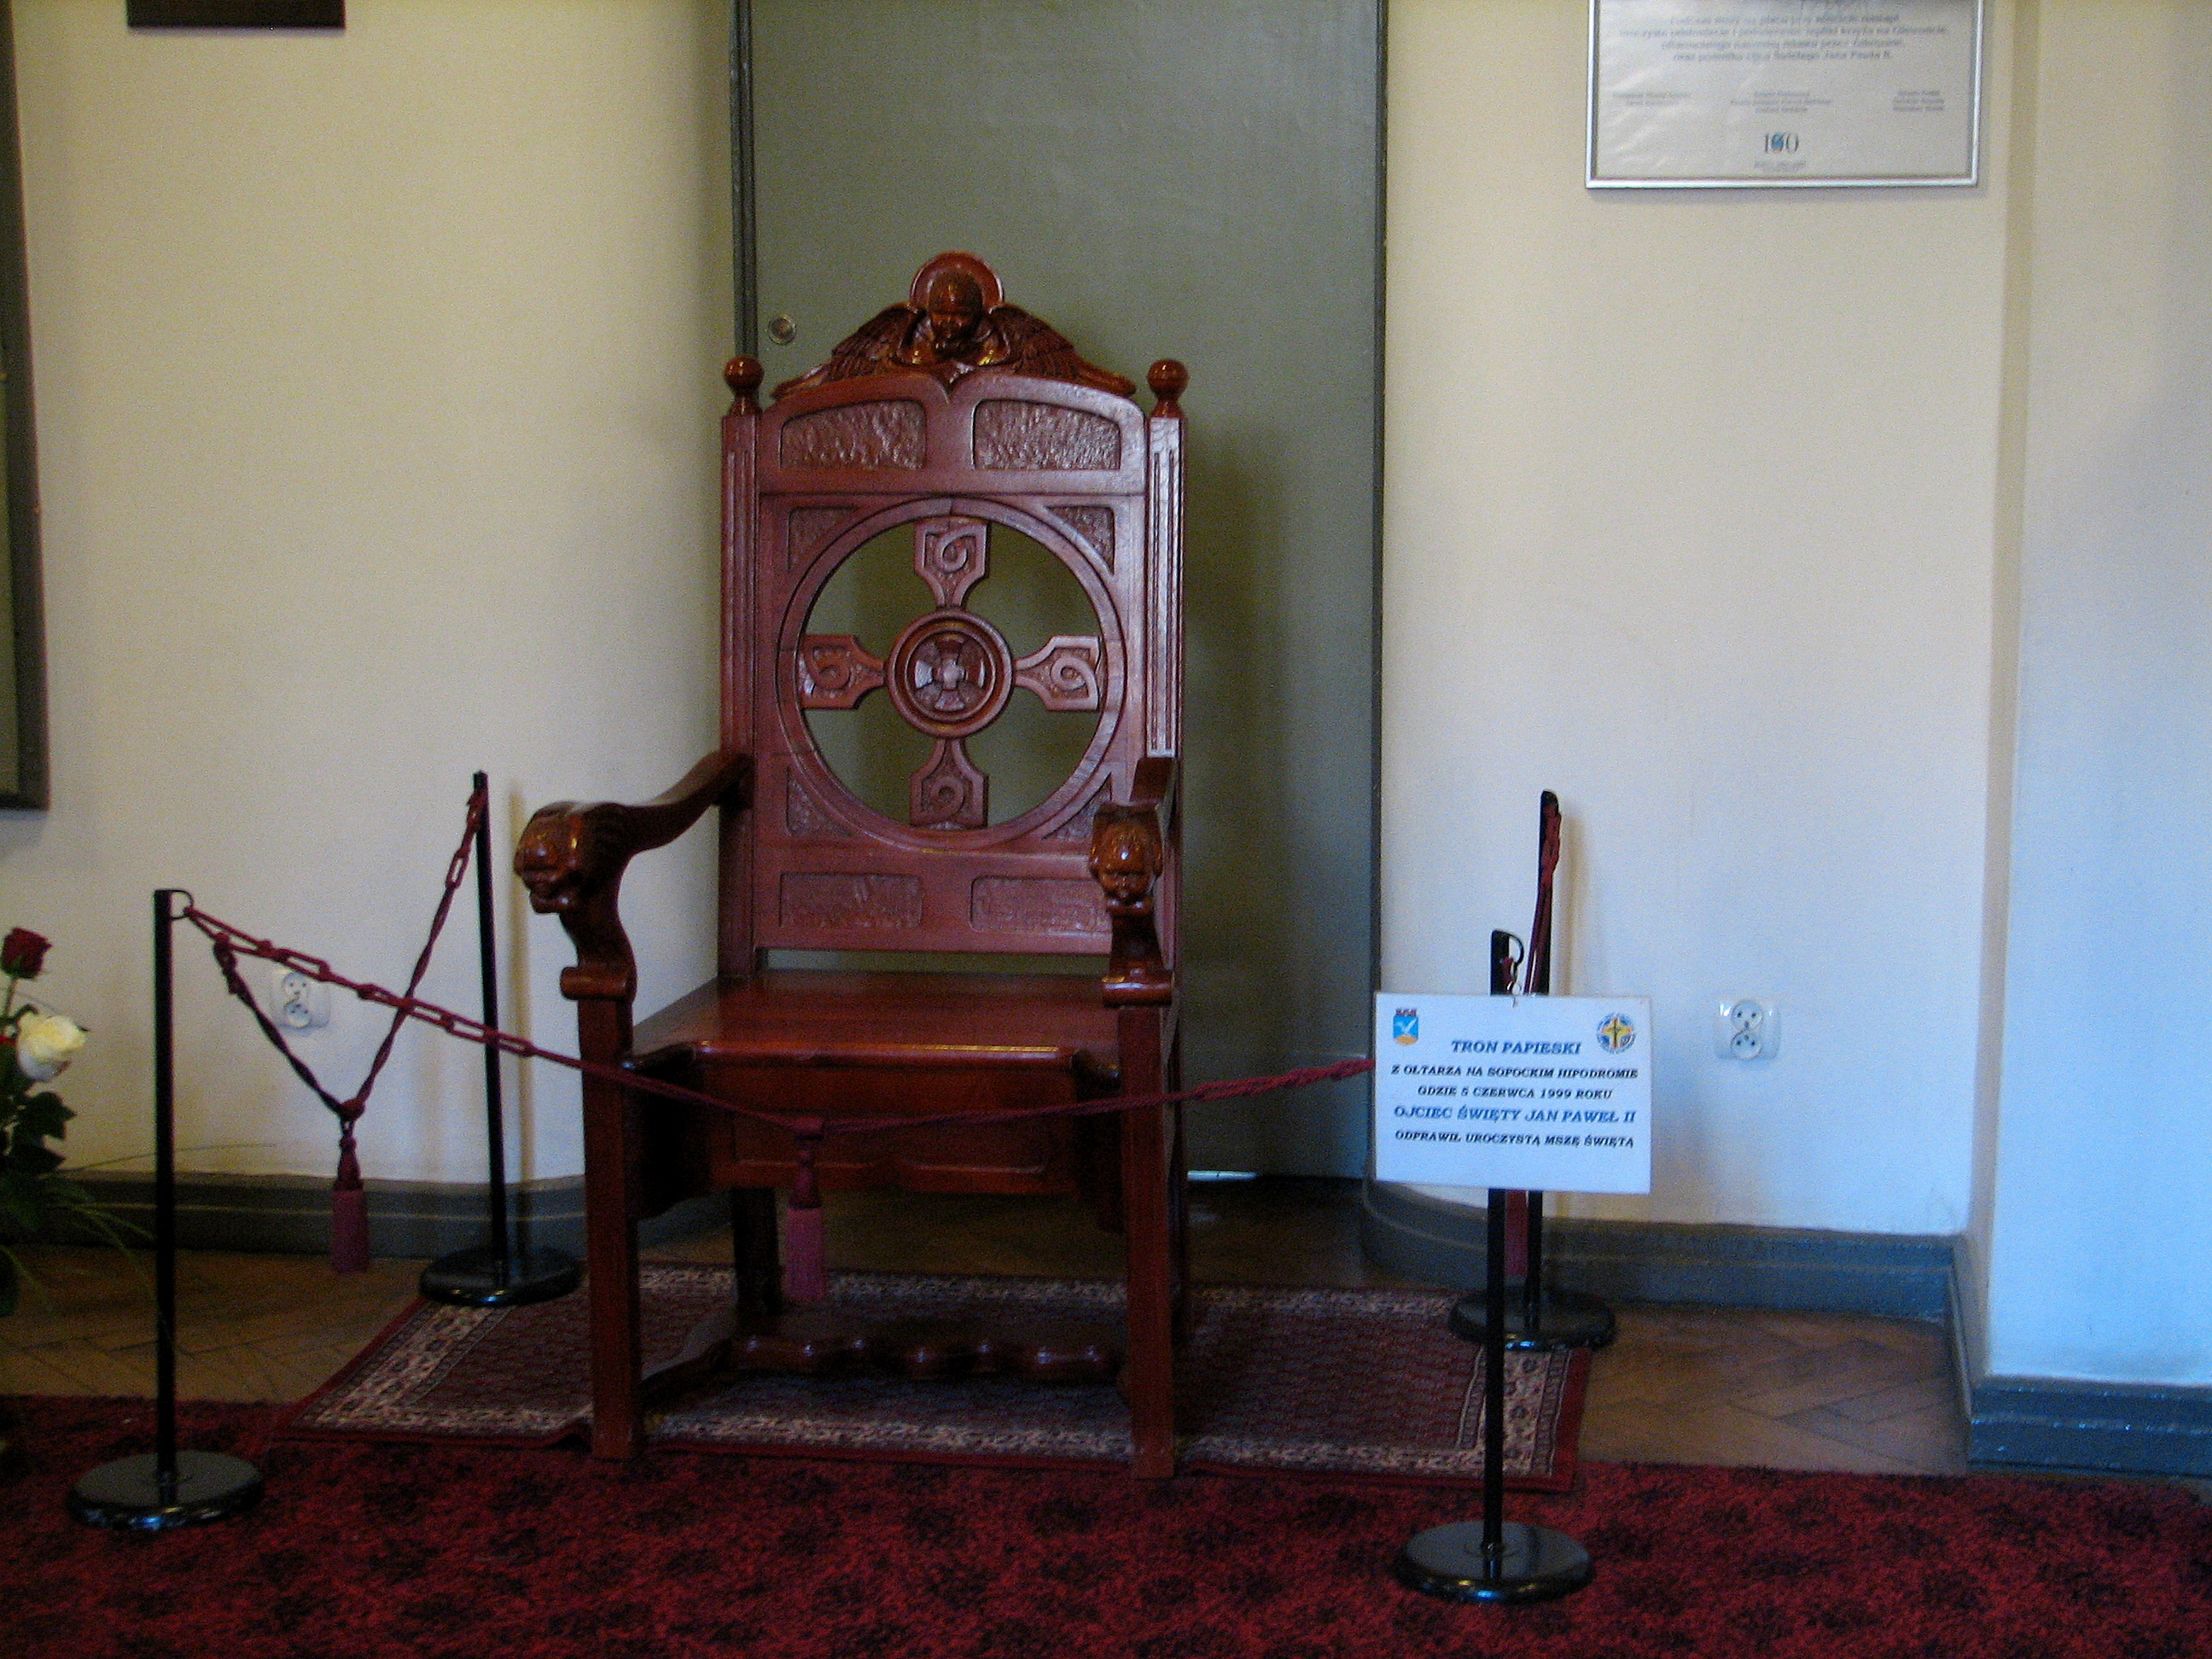 Papal_throne_in_Sopot_Town_Hall.jpg